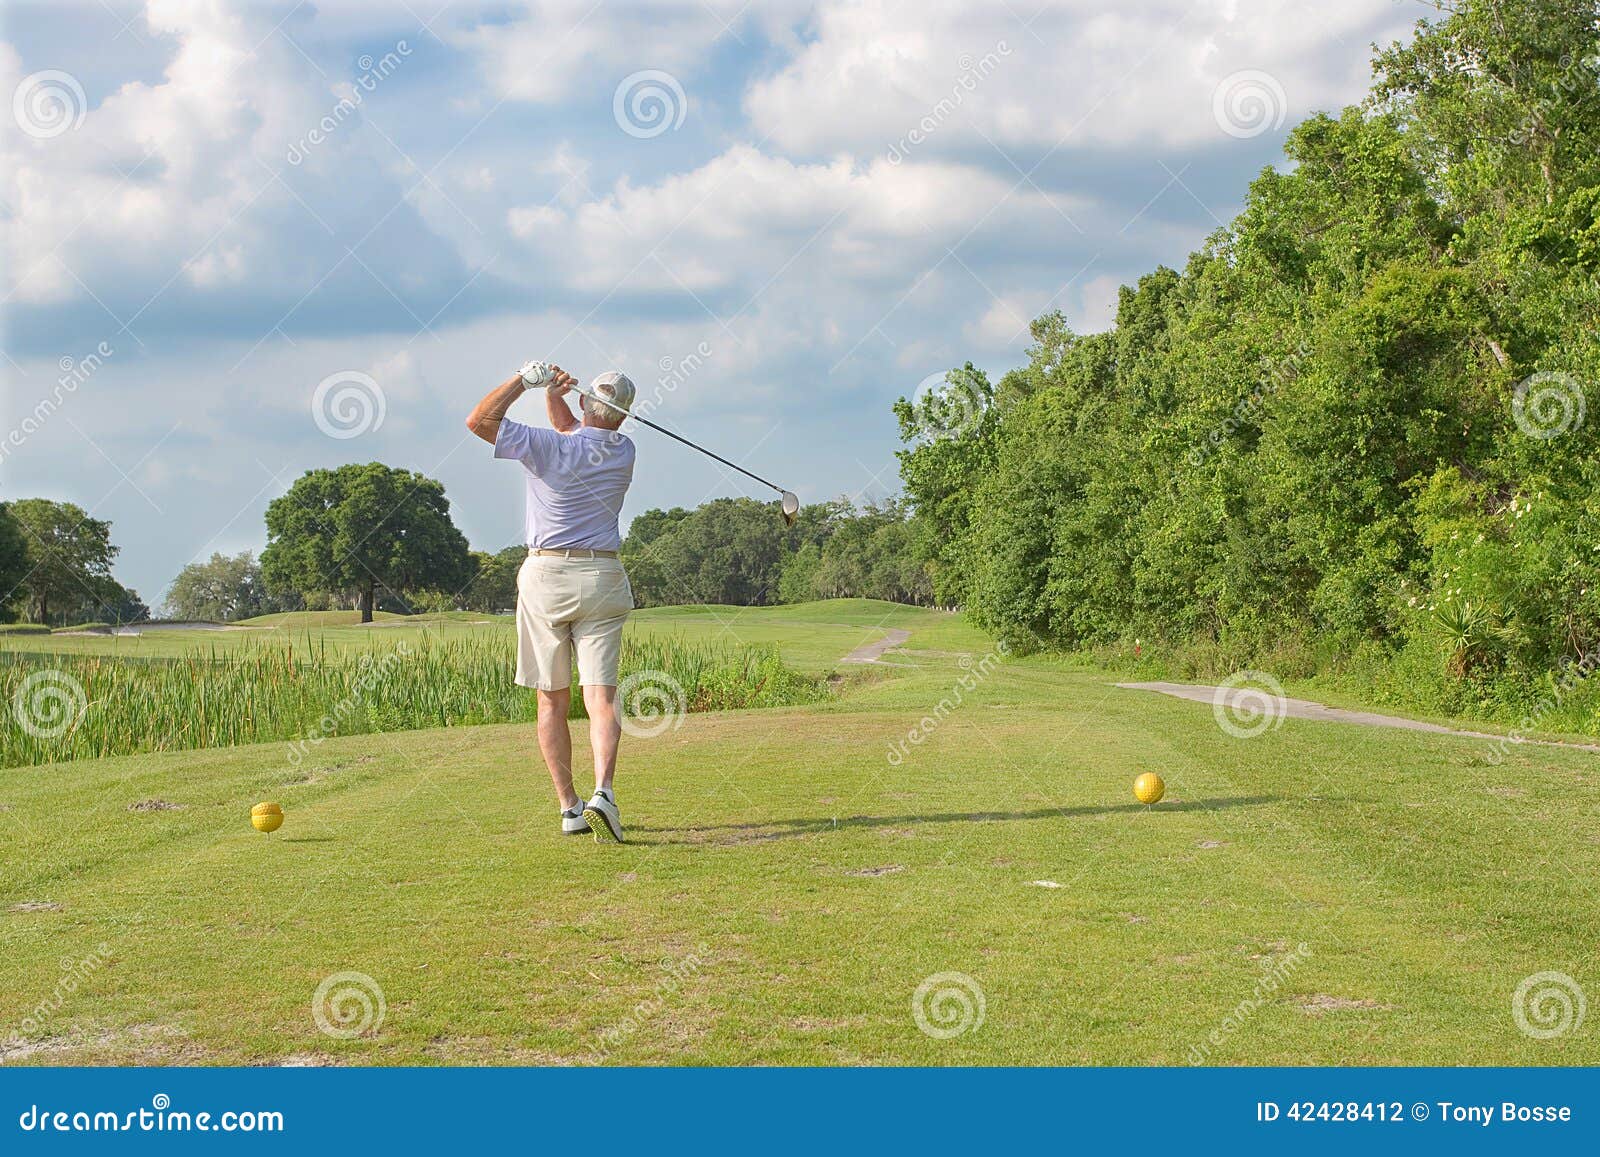 Golf Swing stock photo. Image of player, people, aging ...